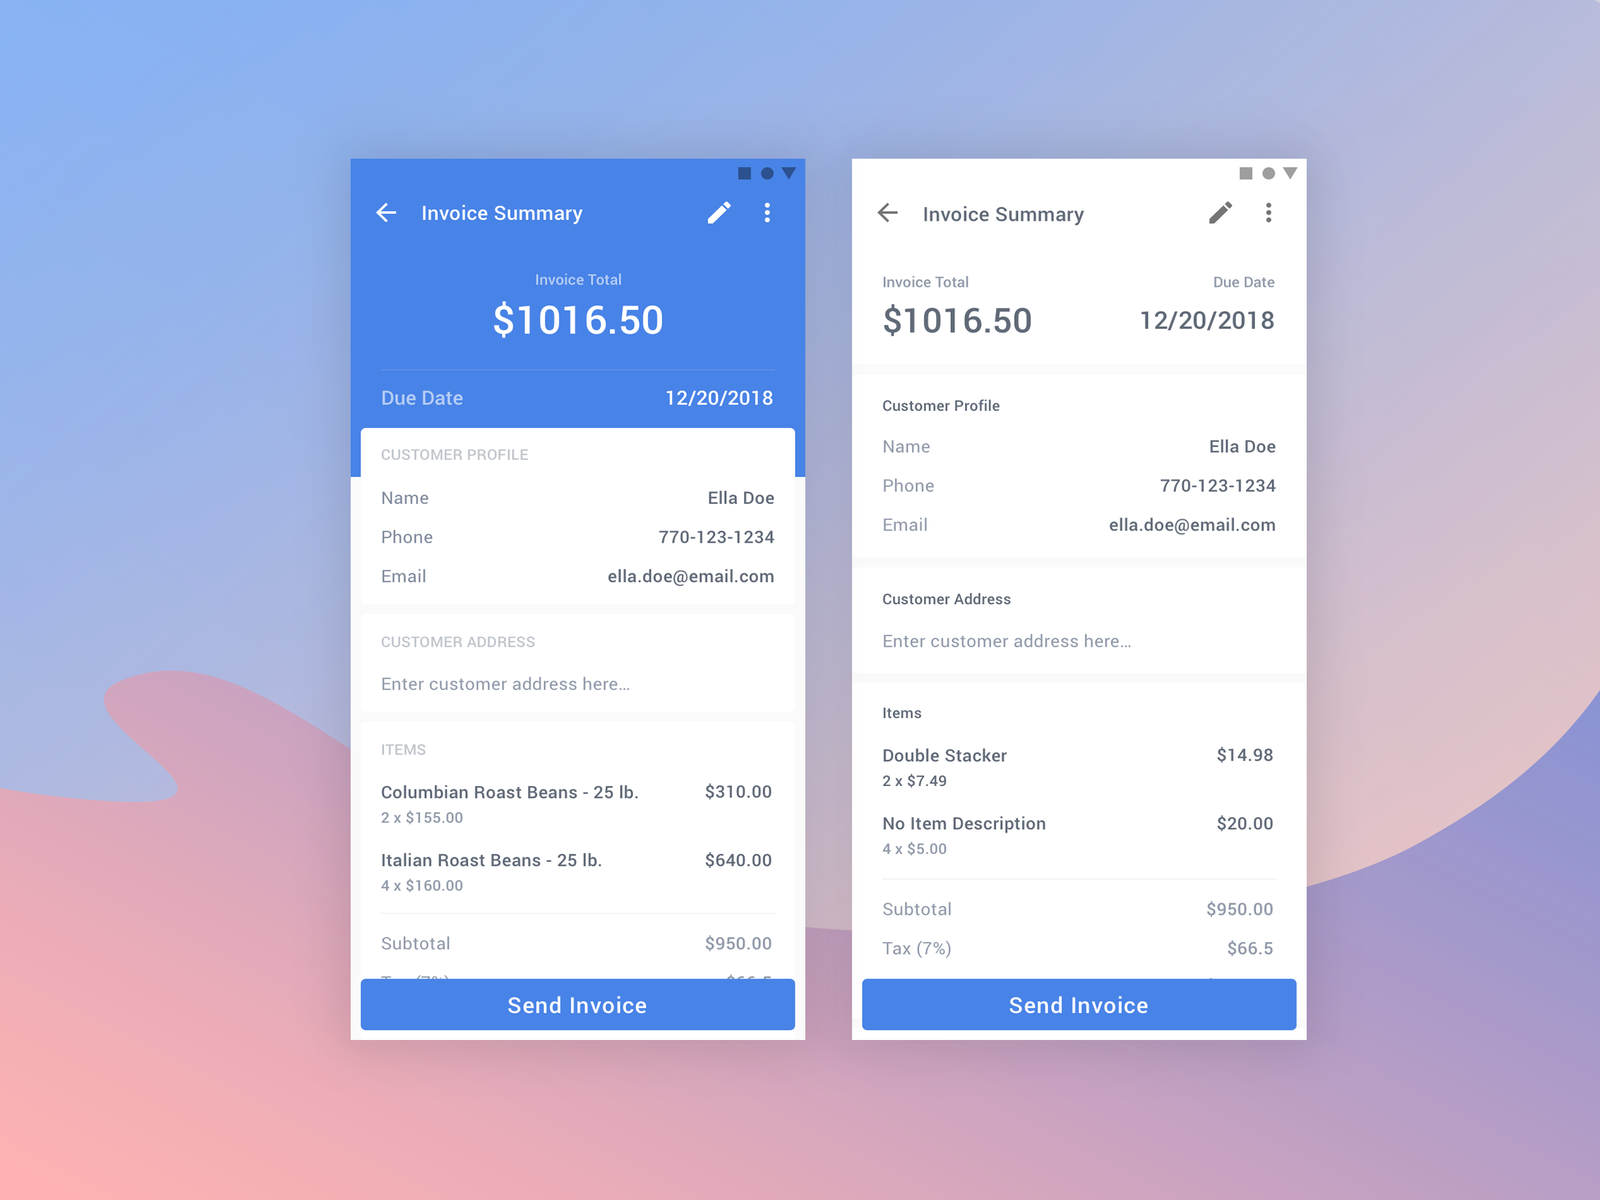 Mobile Invoice by Fengbo Li on Dribbble